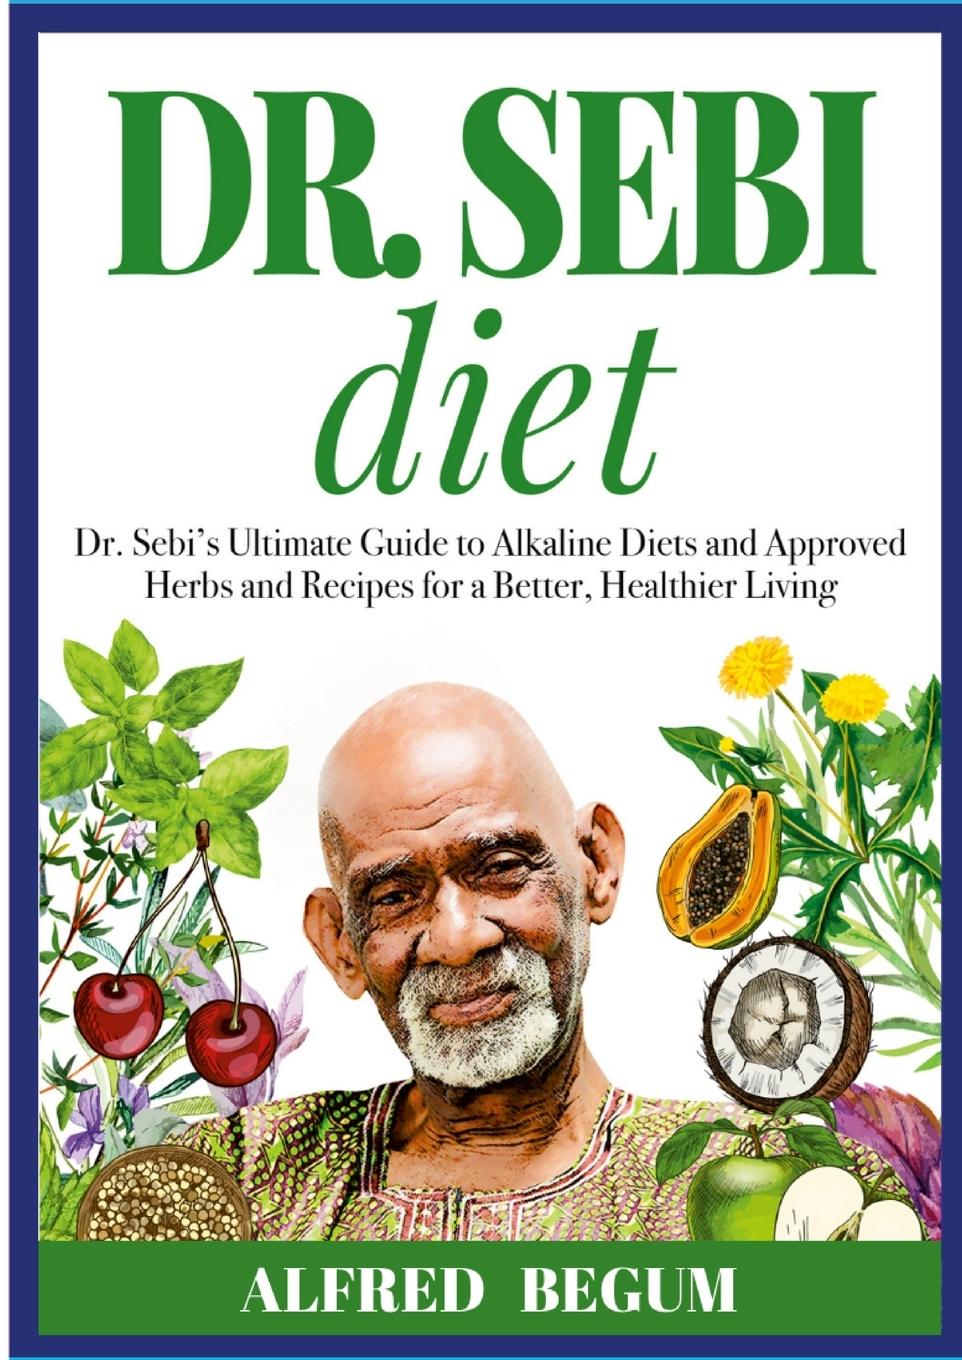 Книга DR. SEBI DIET. Dr. Sebi's Ultimate Guide to Alkaline Diets and Approved Herbs and Recipes for a Better, Healthier Living 